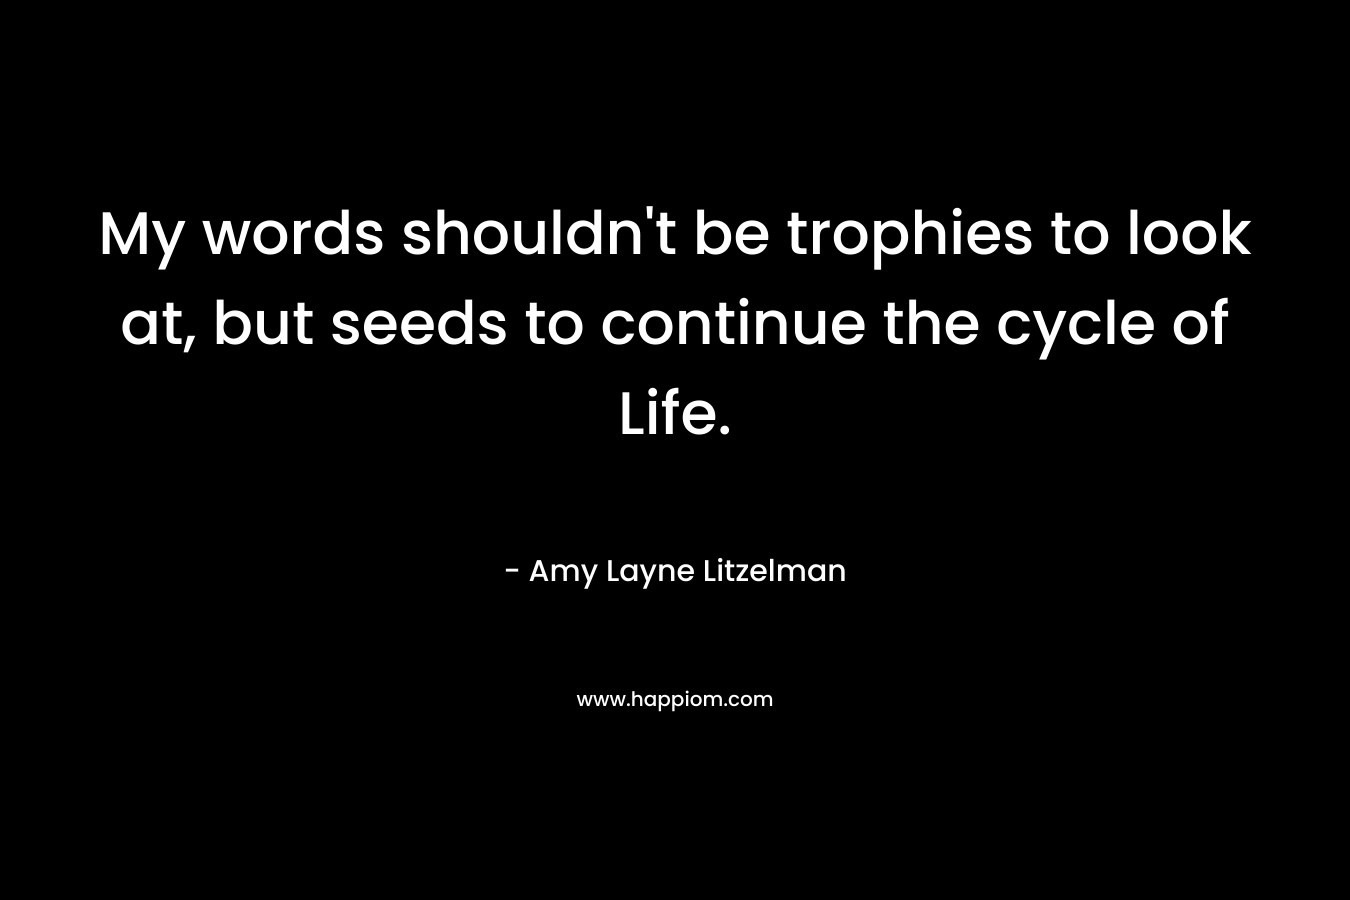 My words shouldn’t be trophies to look at, but seeds to continue the cycle of Life. – Amy Layne Litzelman